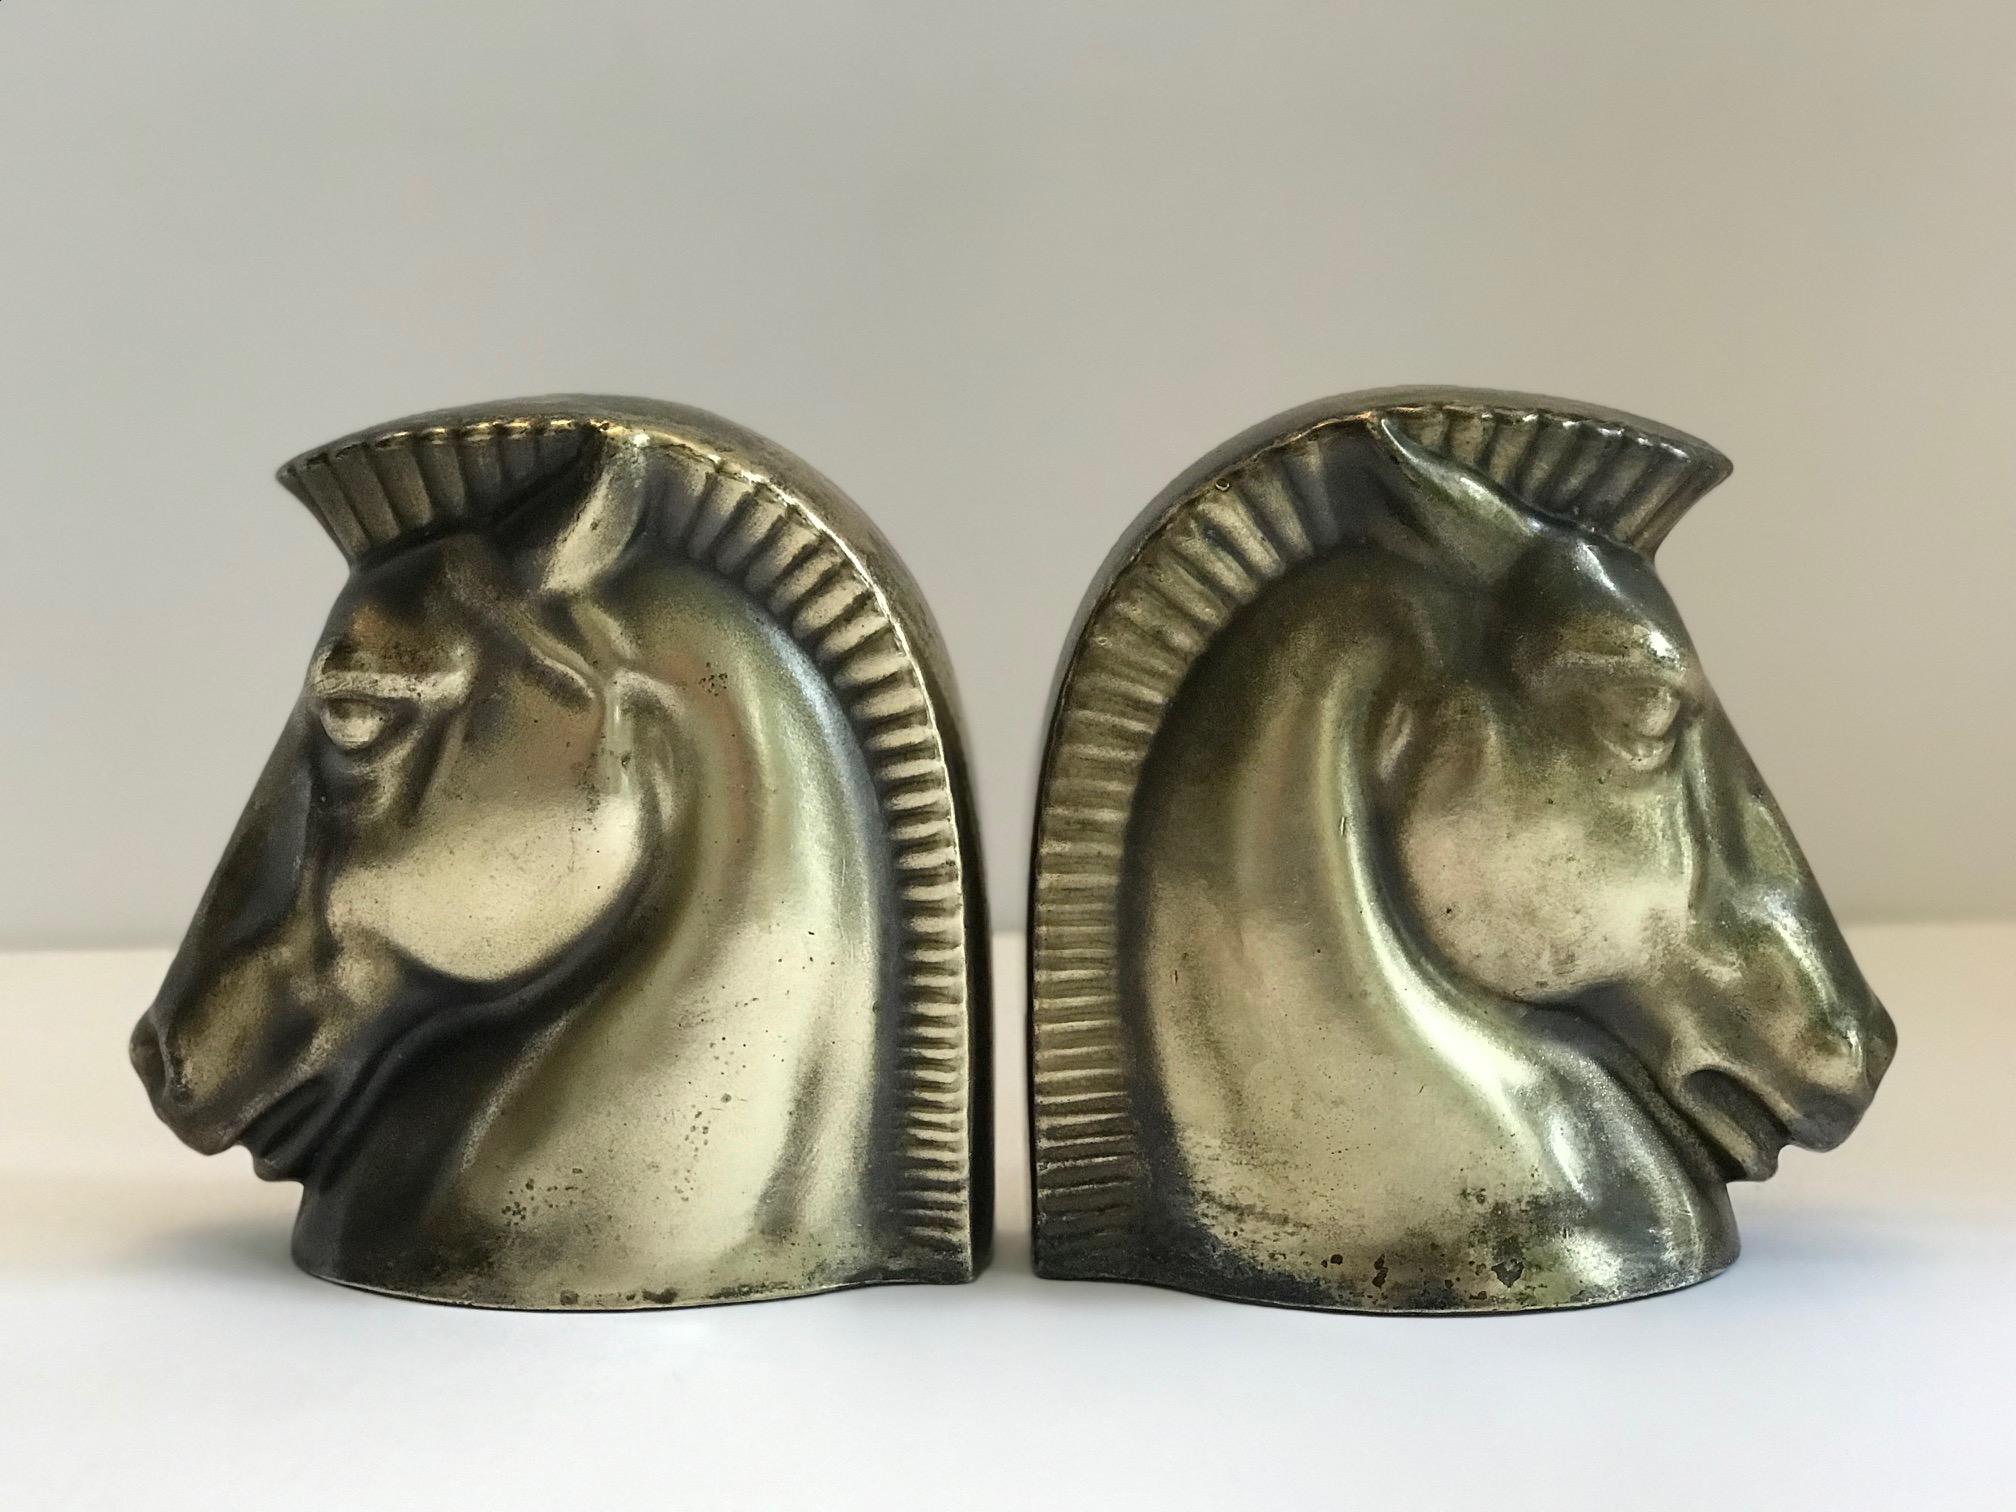 Pair of stunning Art Deco Trojan horse head bookends. Brass plated over hand cast metal. The bookends exhibit a good amount of patina appropriate for their age, adding to their beauty and character. Machine Age design and highly stylized from all